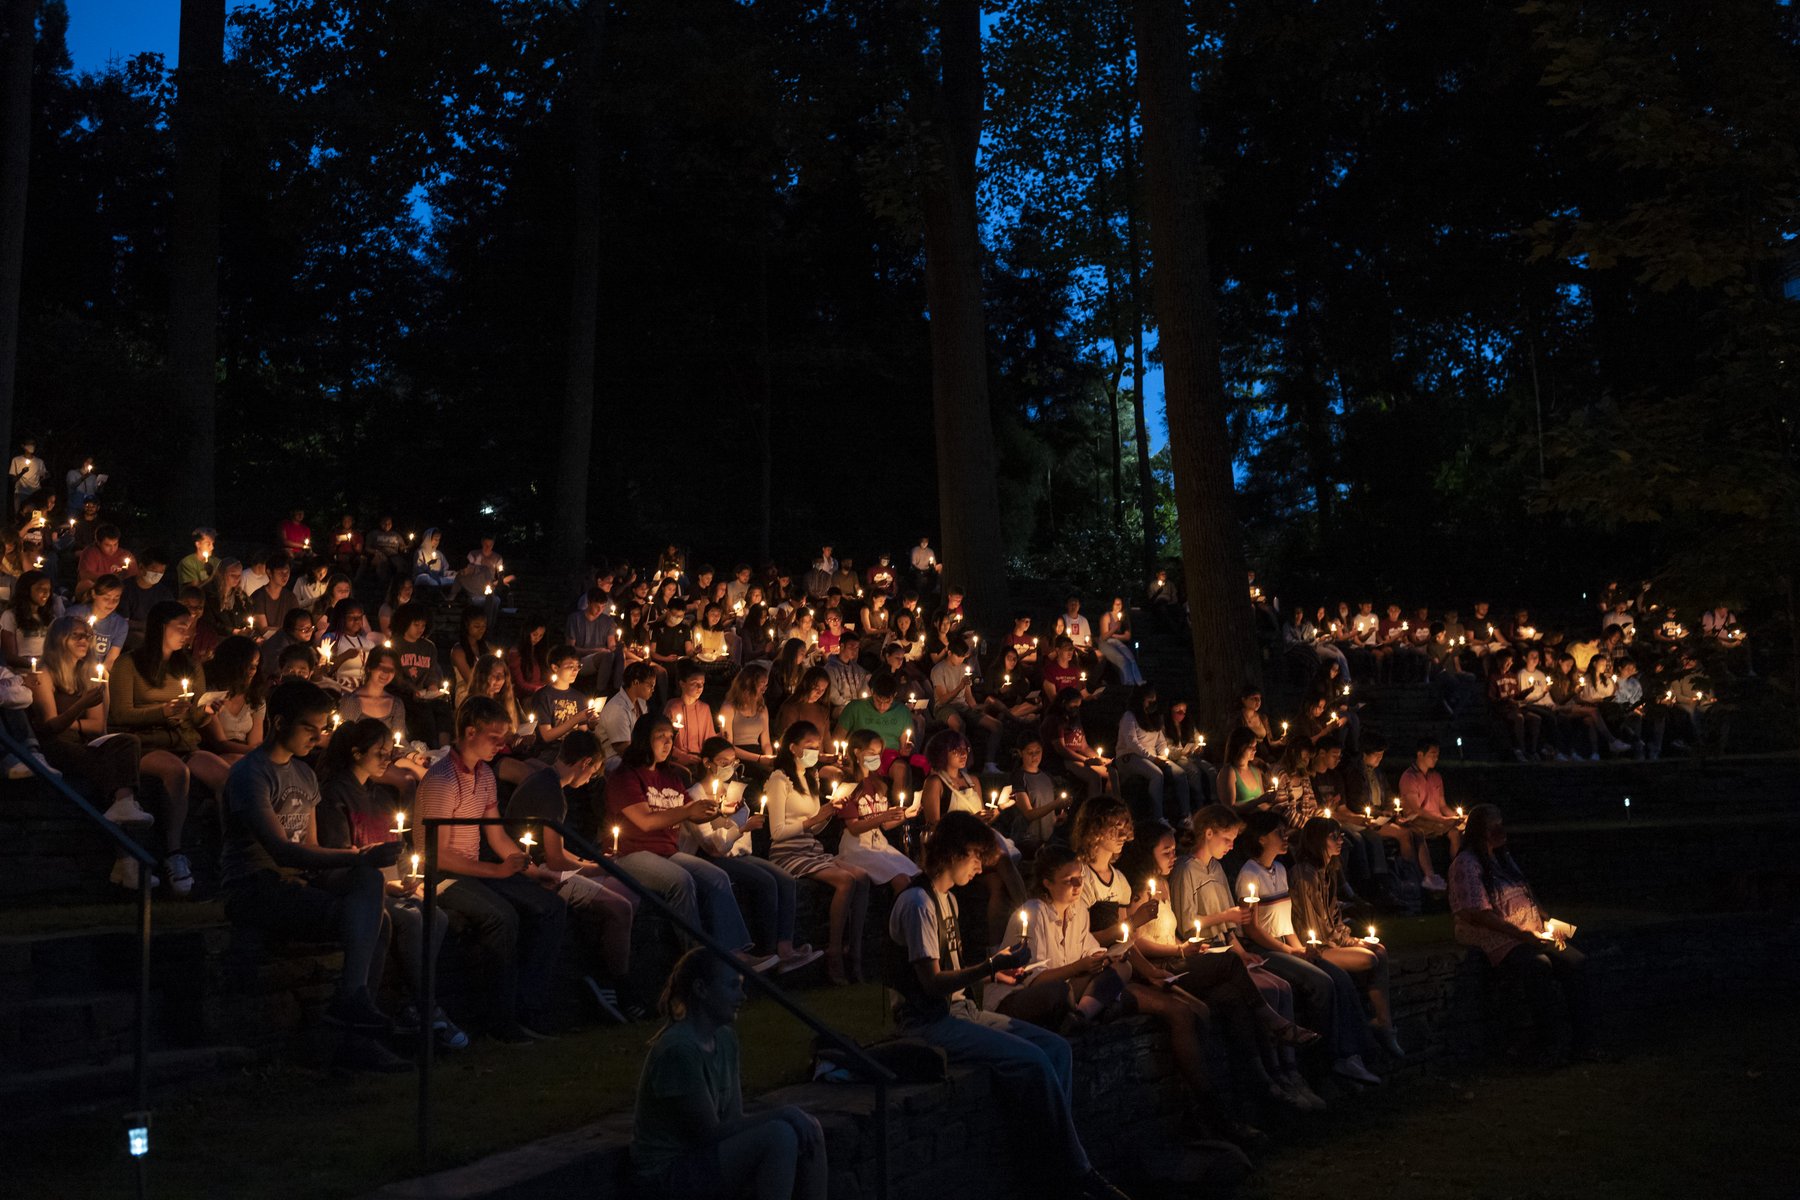 Large group of students sitting in the college's amphitheater holding candles at night time collection.